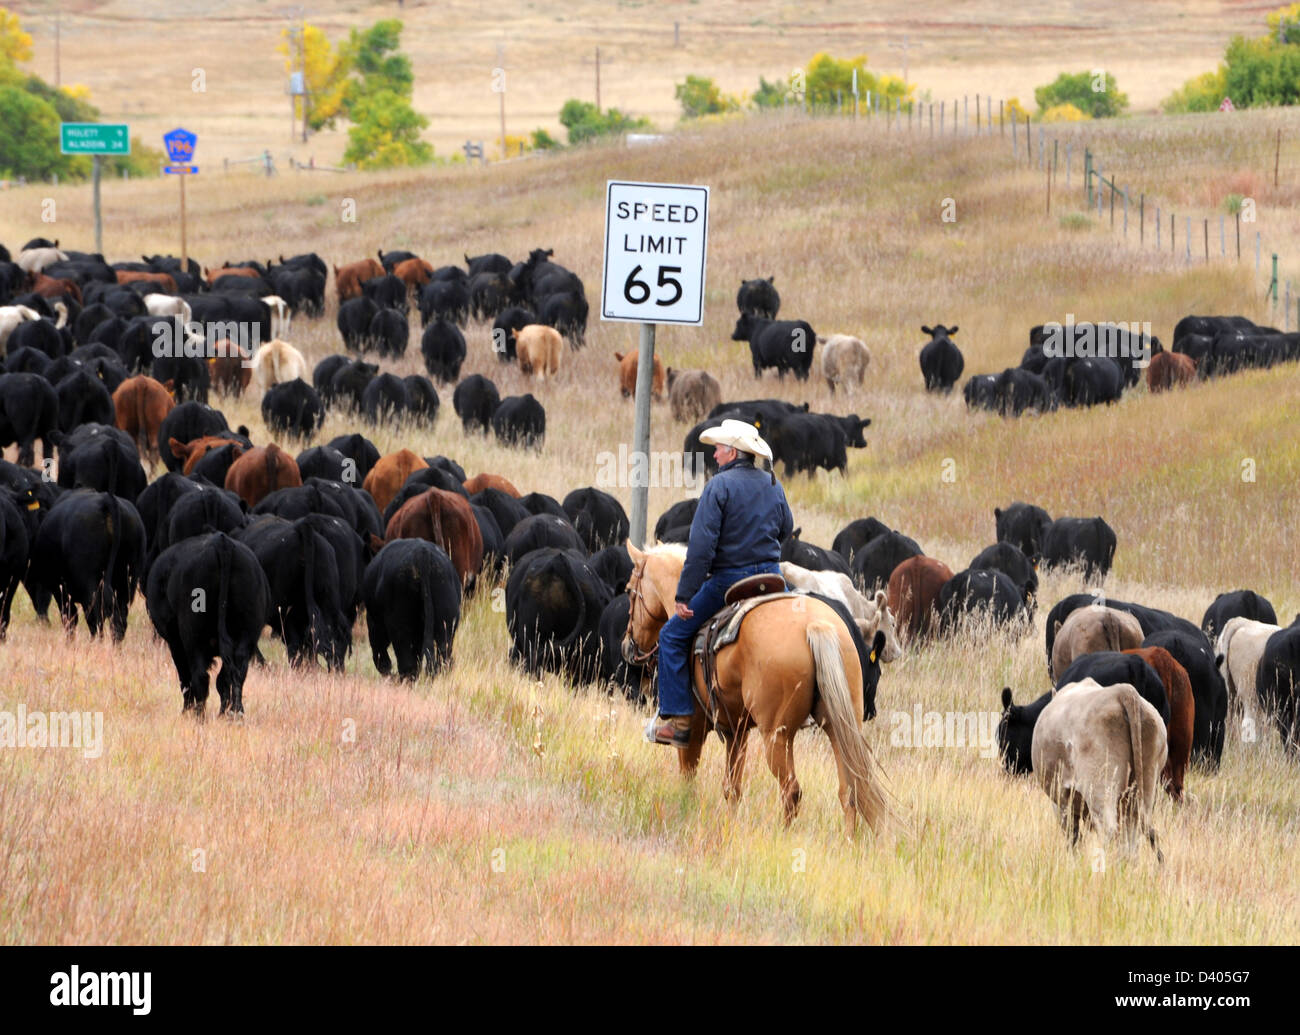 Cowboy herd cattle with speed sign, roundup cattle, cattle to winter pasture, cattle to summer pasture, wrangler, cattle,herd, Stock Photo